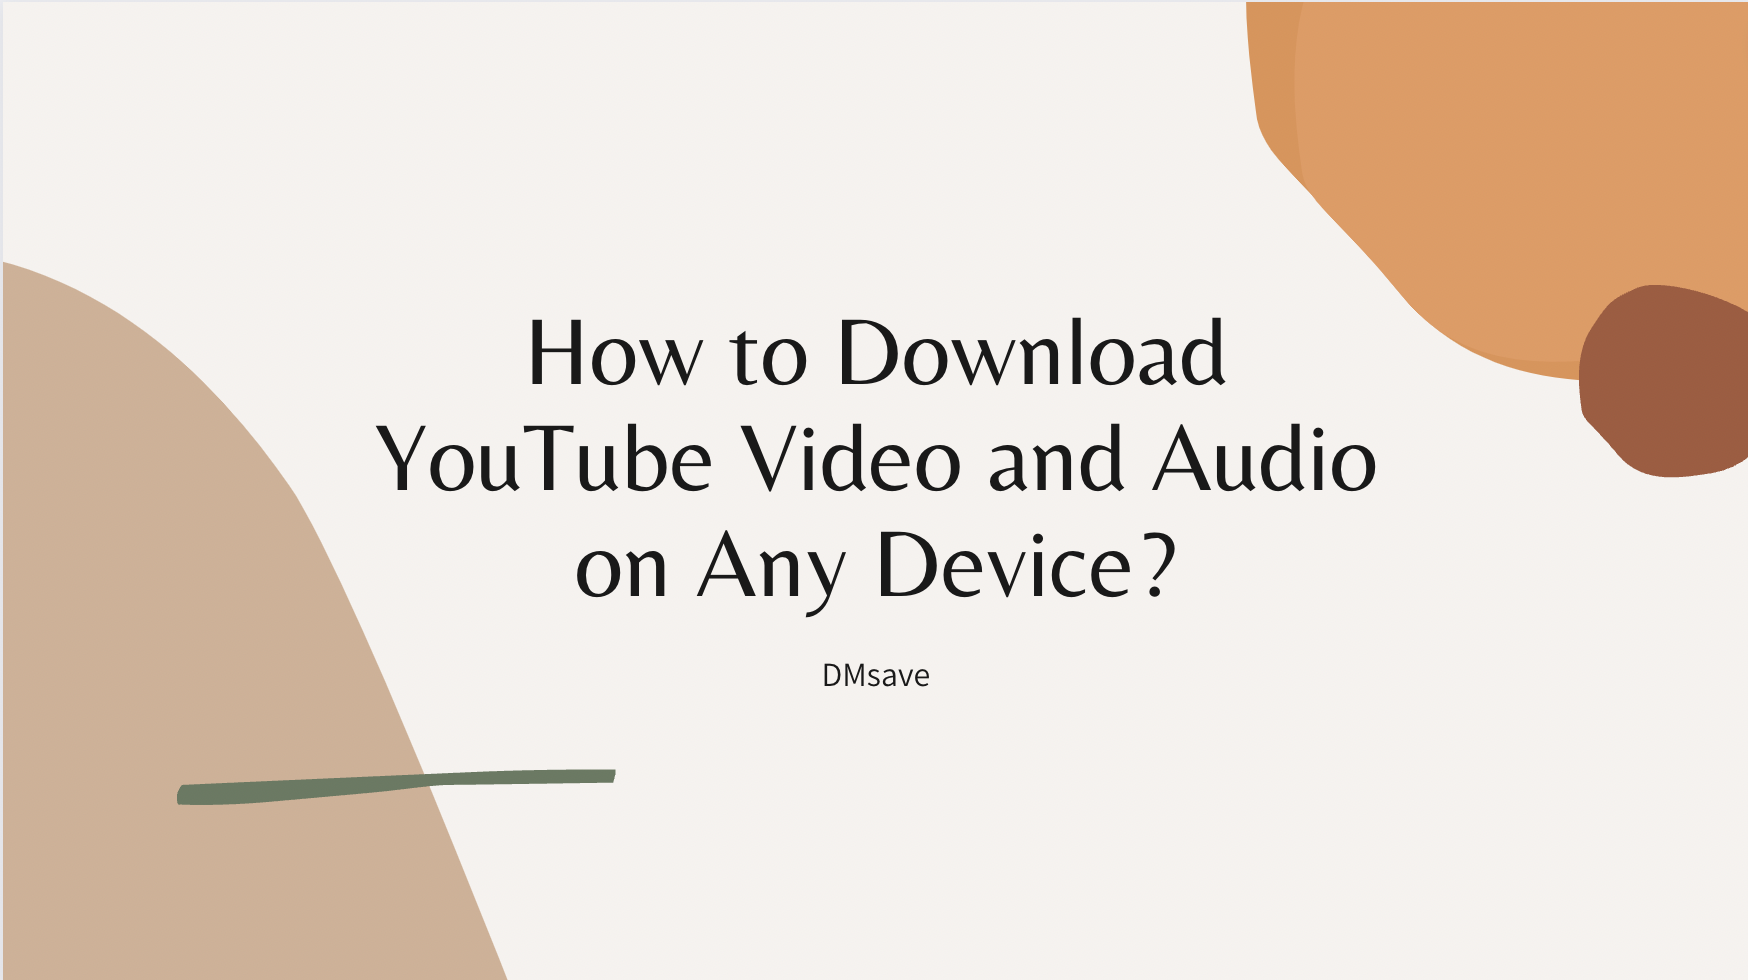 How to Download YouTube Video and Audio on Any Device?